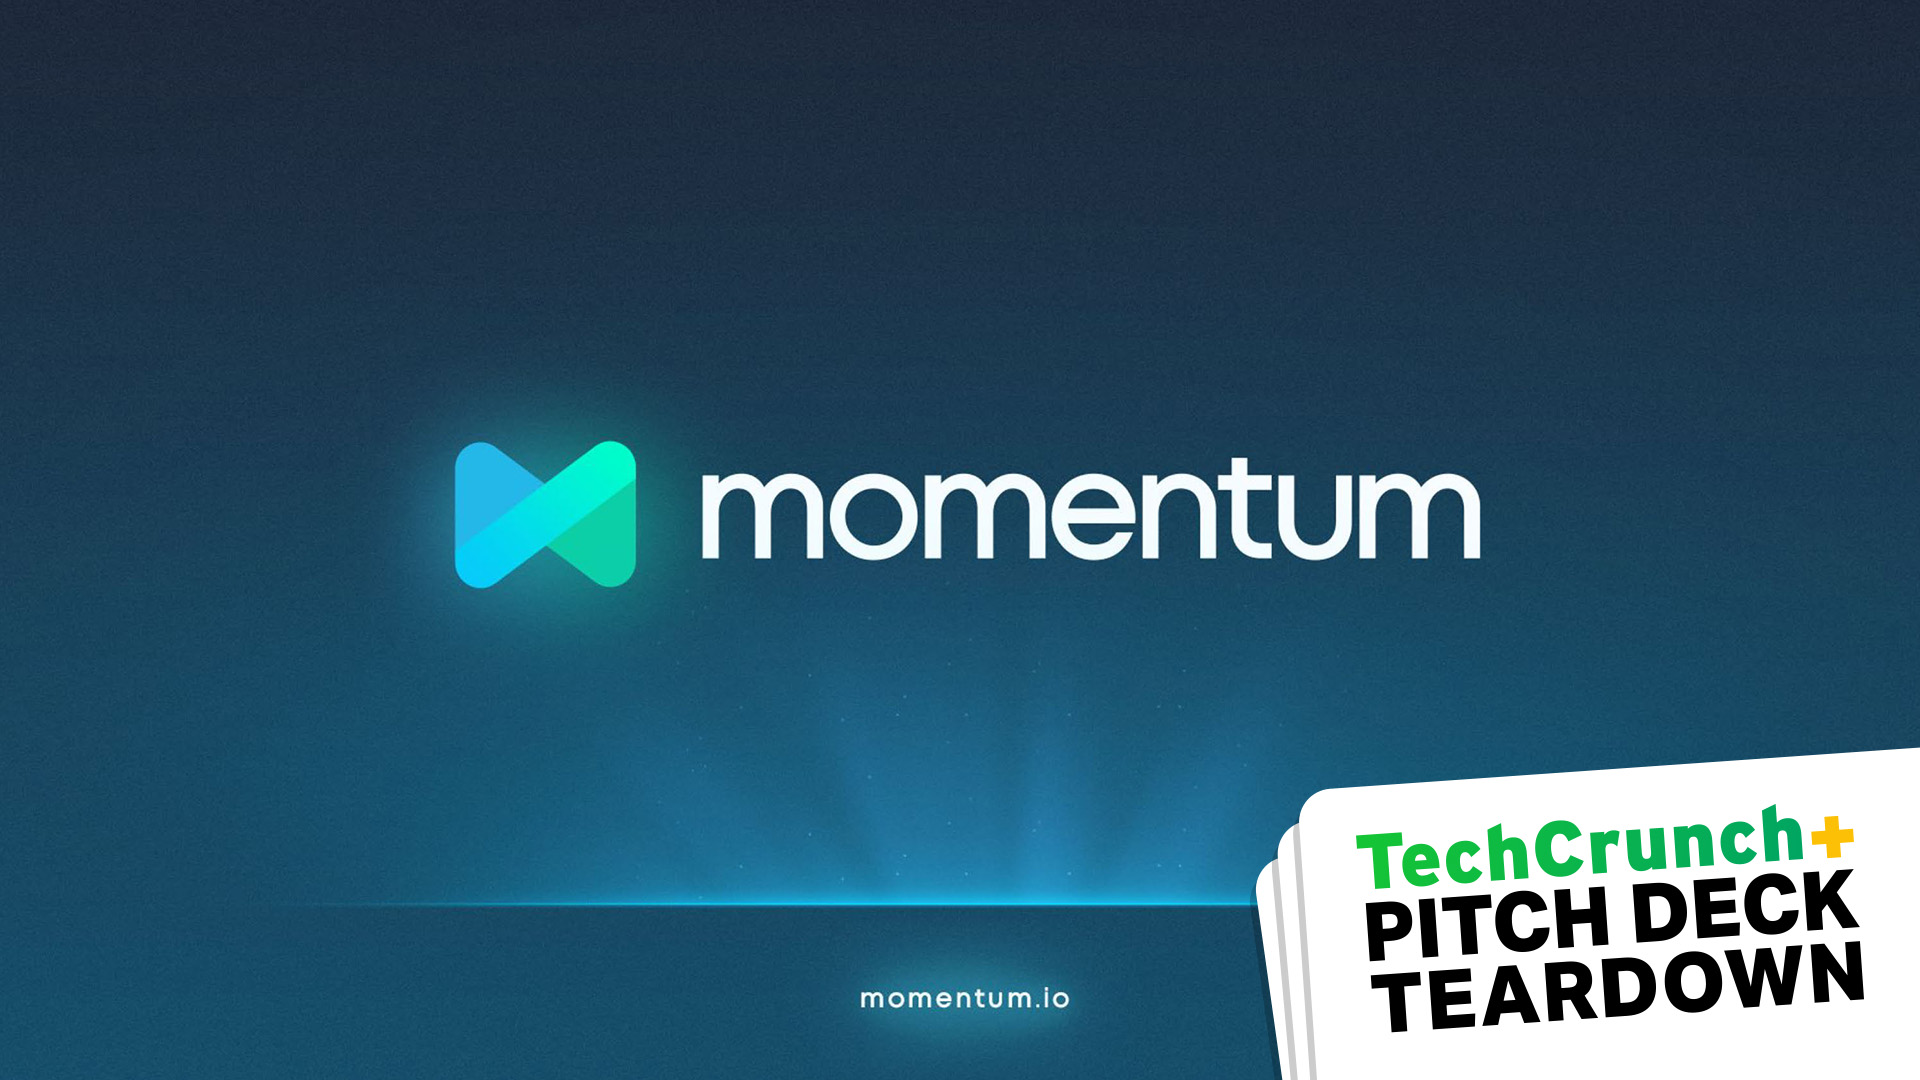 Disassembly of the presentation deck - Momentum